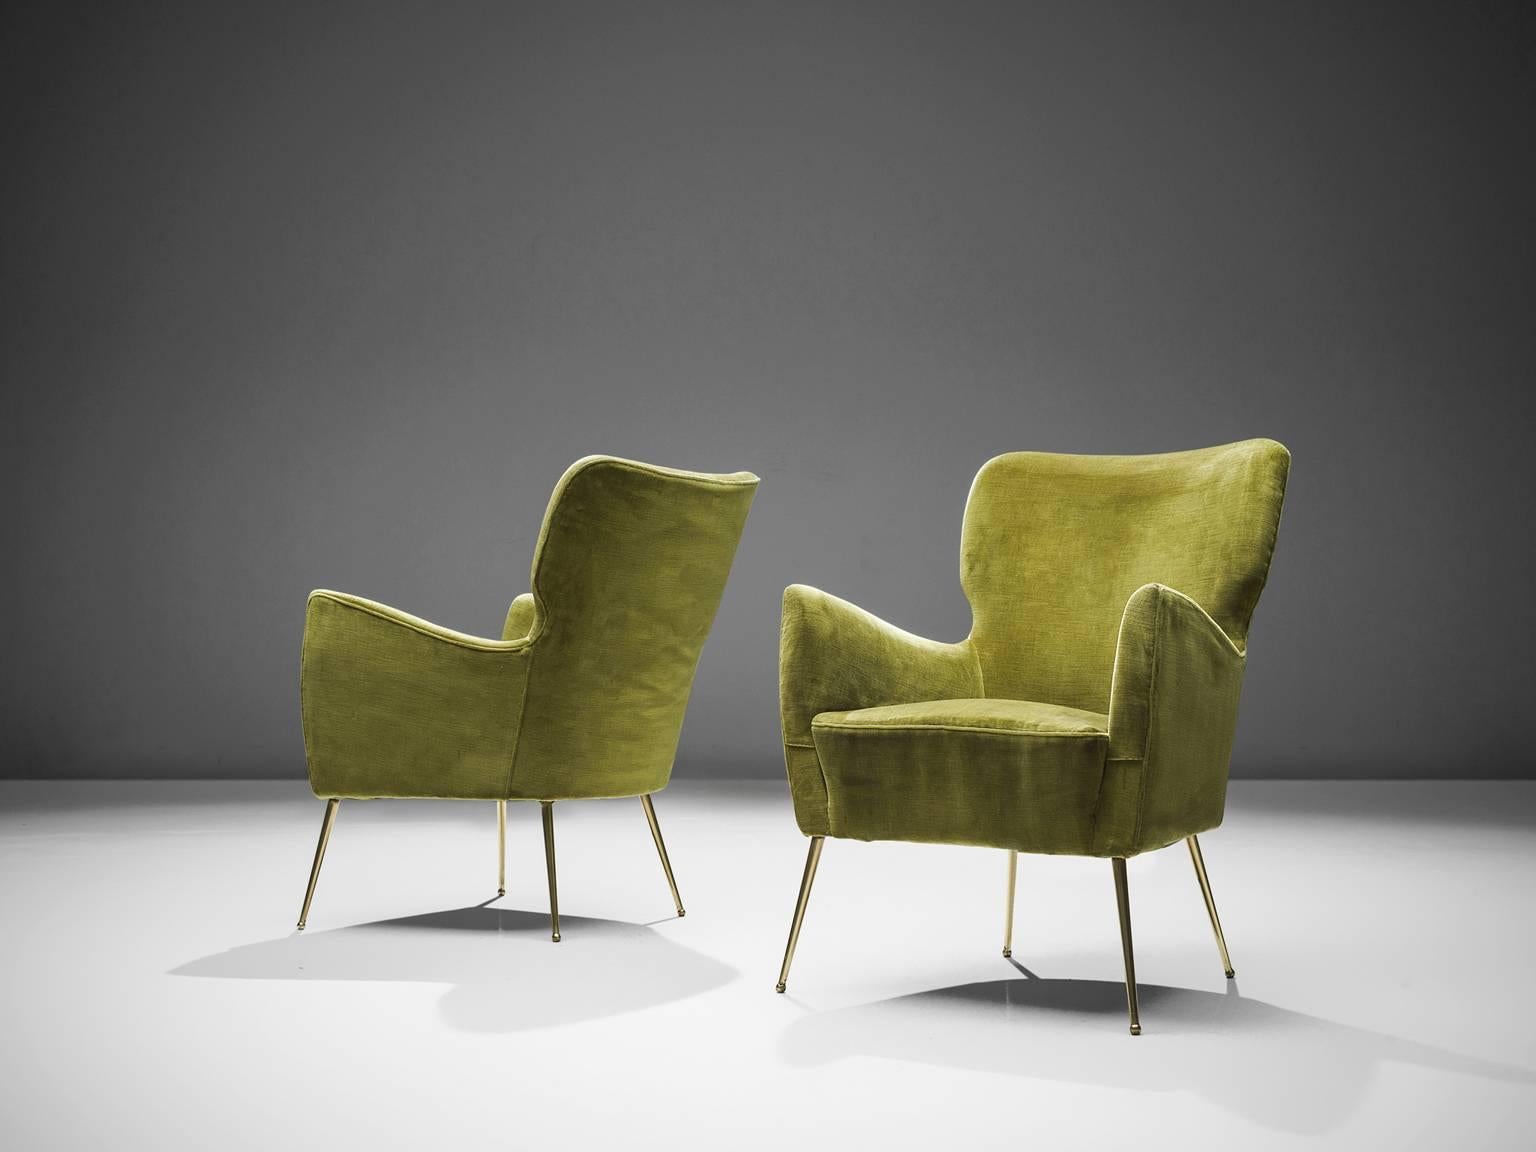 Lounge chairs in green velvet, brassed metal legs, Italy, circa 1950.

This pair of lounge chairs is designed in 1950 in Italy. They stand out thanks to their butterfly armrests and very high brass legs. Their size is wonderfully eloquent thanks